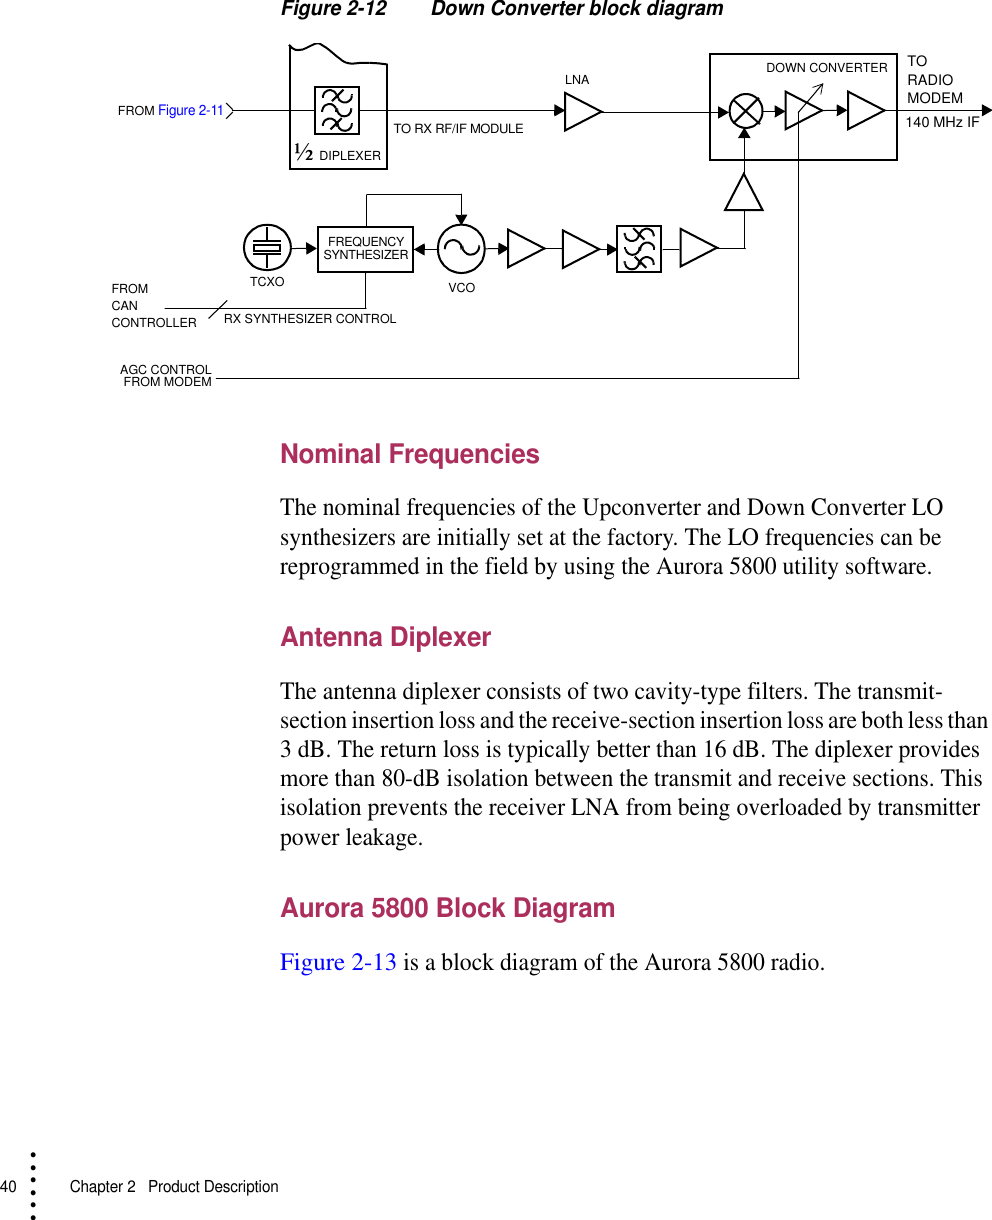 40   Chapter 2  Product Description• • • •••Figure 2-12 Down Converter block diagramNominal FrequenciesThe nominal frequencies of the Upconverter and Down Converter LO synthesizers are initially set at the factory. The LO frequencies can be reprogrammed in the field by using the Aurora 5800 utility software.Antenna DiplexerThe antenna diplexer consists of two cavity-type filters. The transmit-section insertion loss and the receive-section insertion loss are both less than 3 dB. The return loss is typically better than 16 dB. The diplexer provides more than 80-dB isolation between the transmit and receive sections. This isolation prevents the receiver LNA from being overloaded by transmitter power leakage.Aurora 5800 Block DiagramFigure 2-13 is a block diagram of the Aurora 5800 radio.FROMCANCONTROLLERTCXOFREQUENCYSYNTHESIZERVCORX SYNTHESIZER CONTROLLNA DOWN CONVERTERAGC CONTROLFROM MODEMTO RX RF/IF MODULE½ DIPLEXERFROM Figure 2-11140 MHz IFTO RADIOMODEM